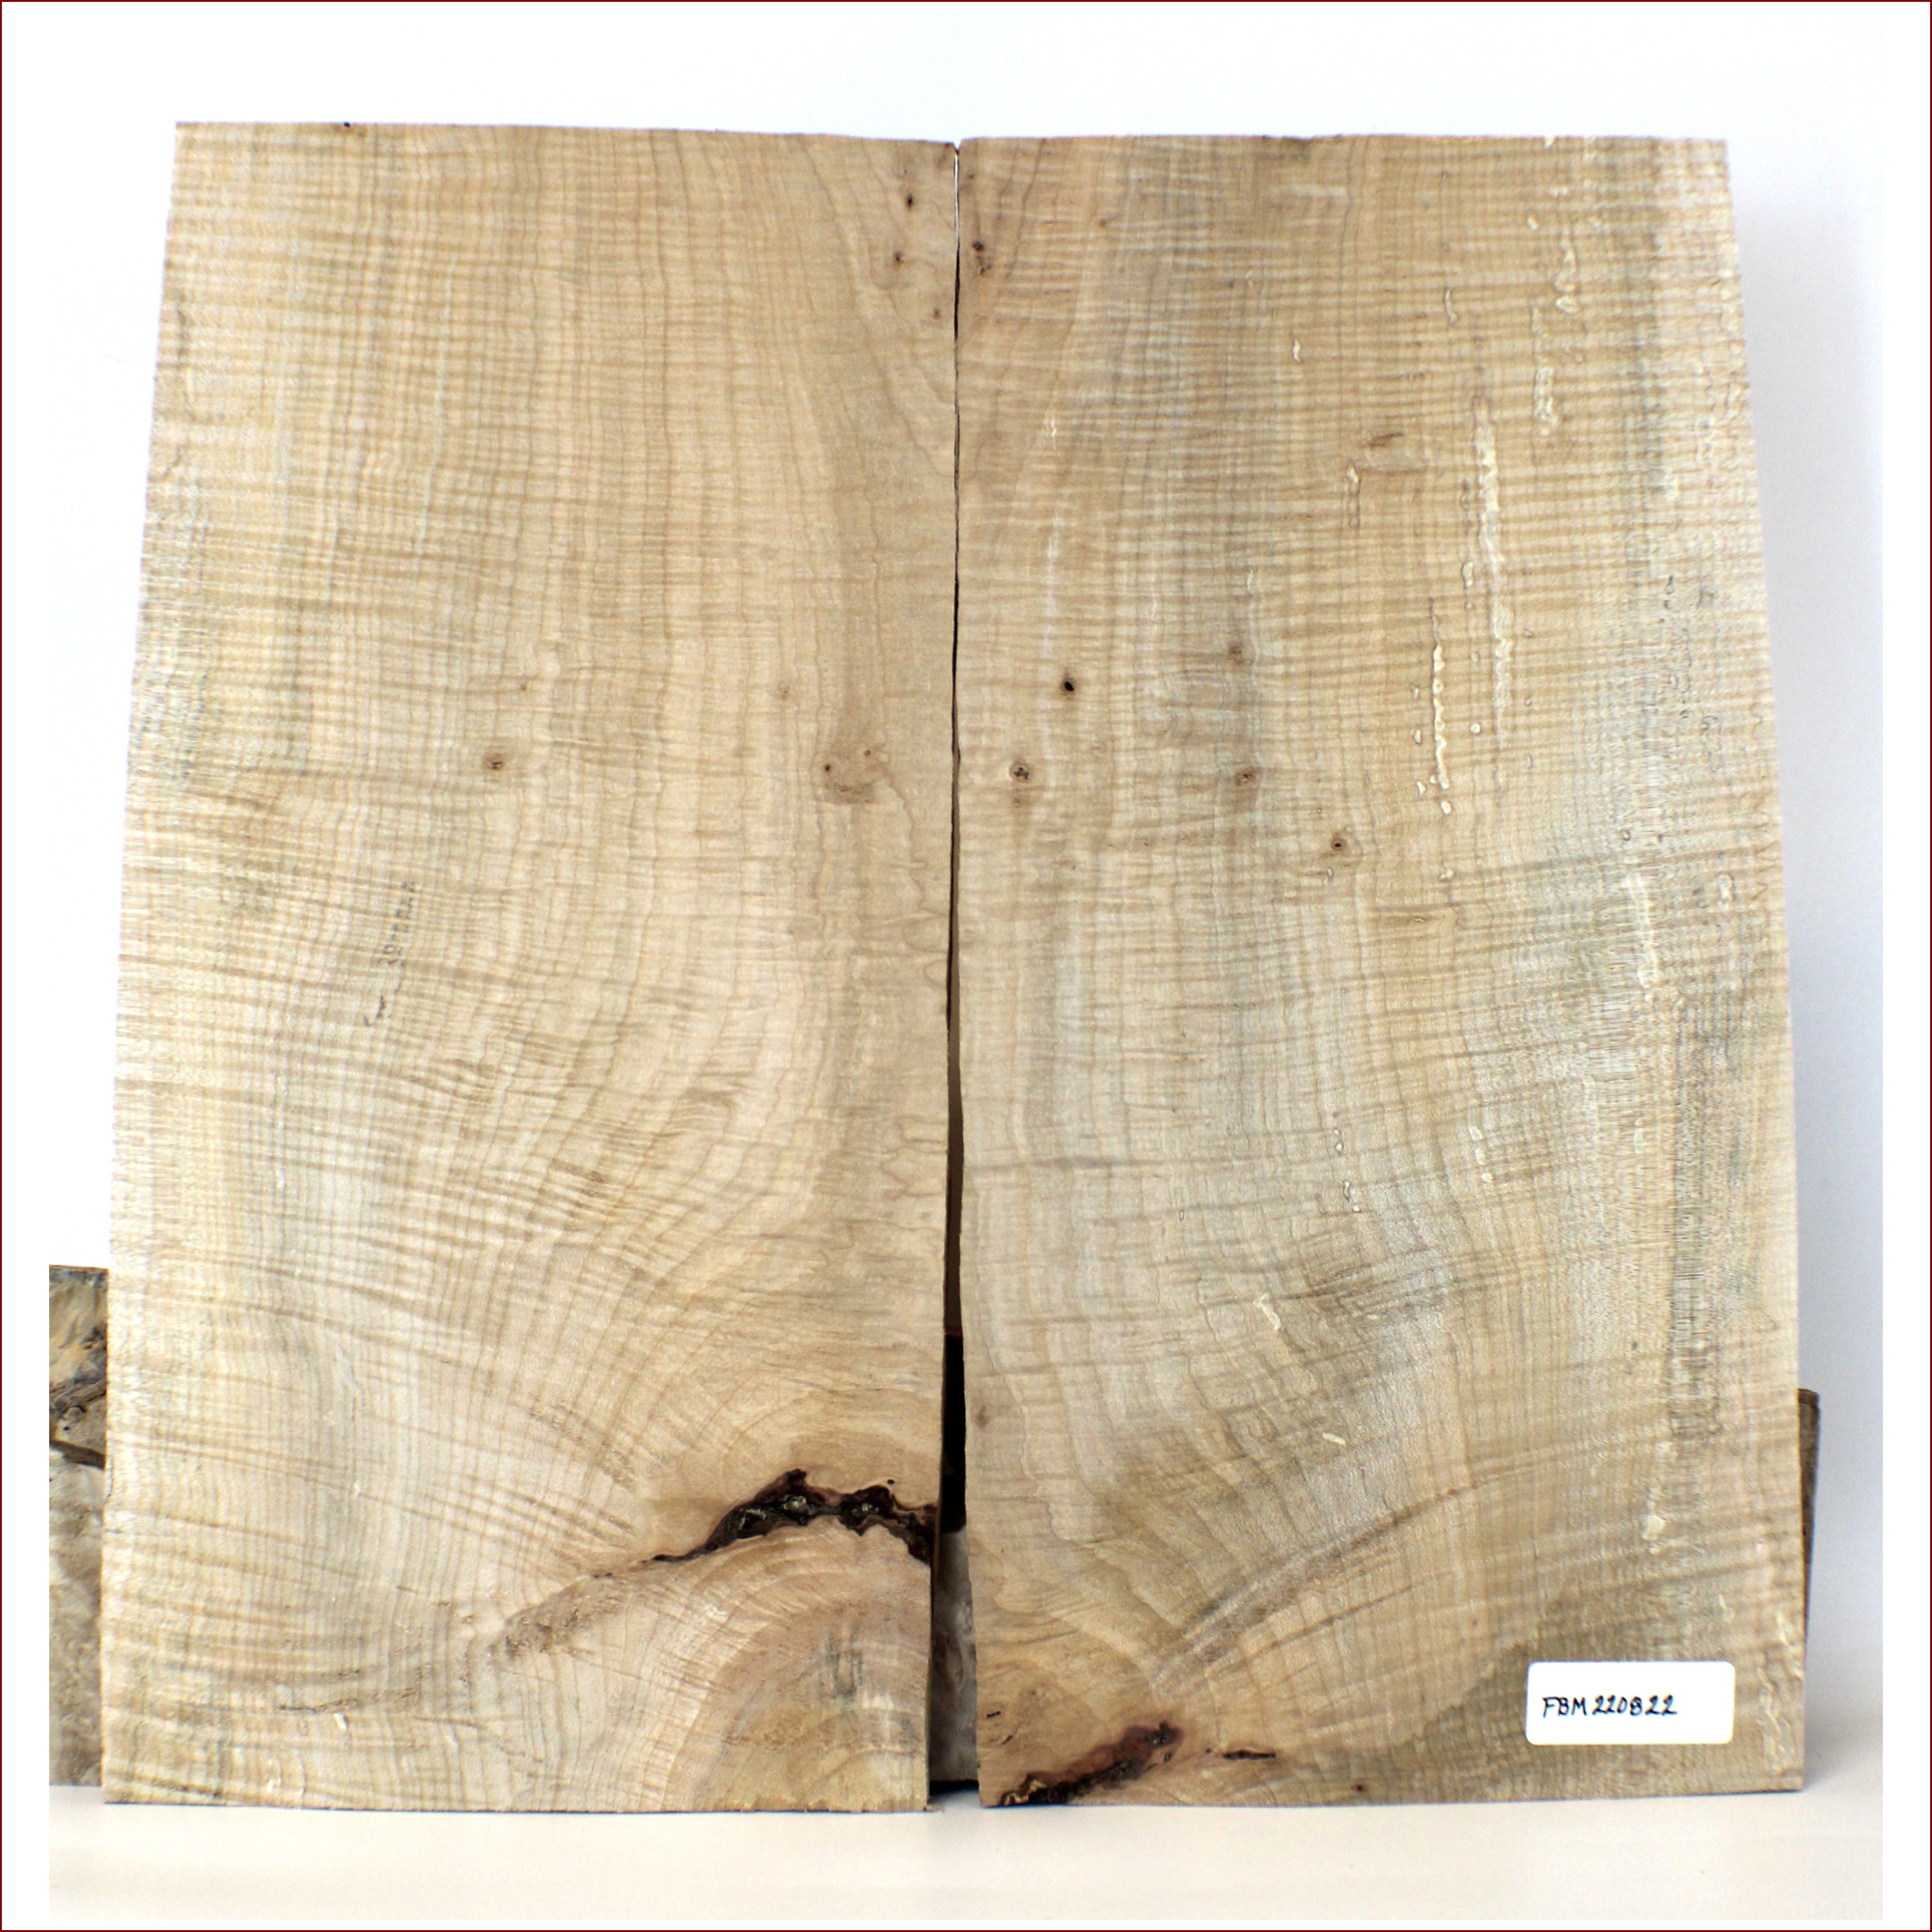 Dimensions: Thickness (each piece): .675, width: 10